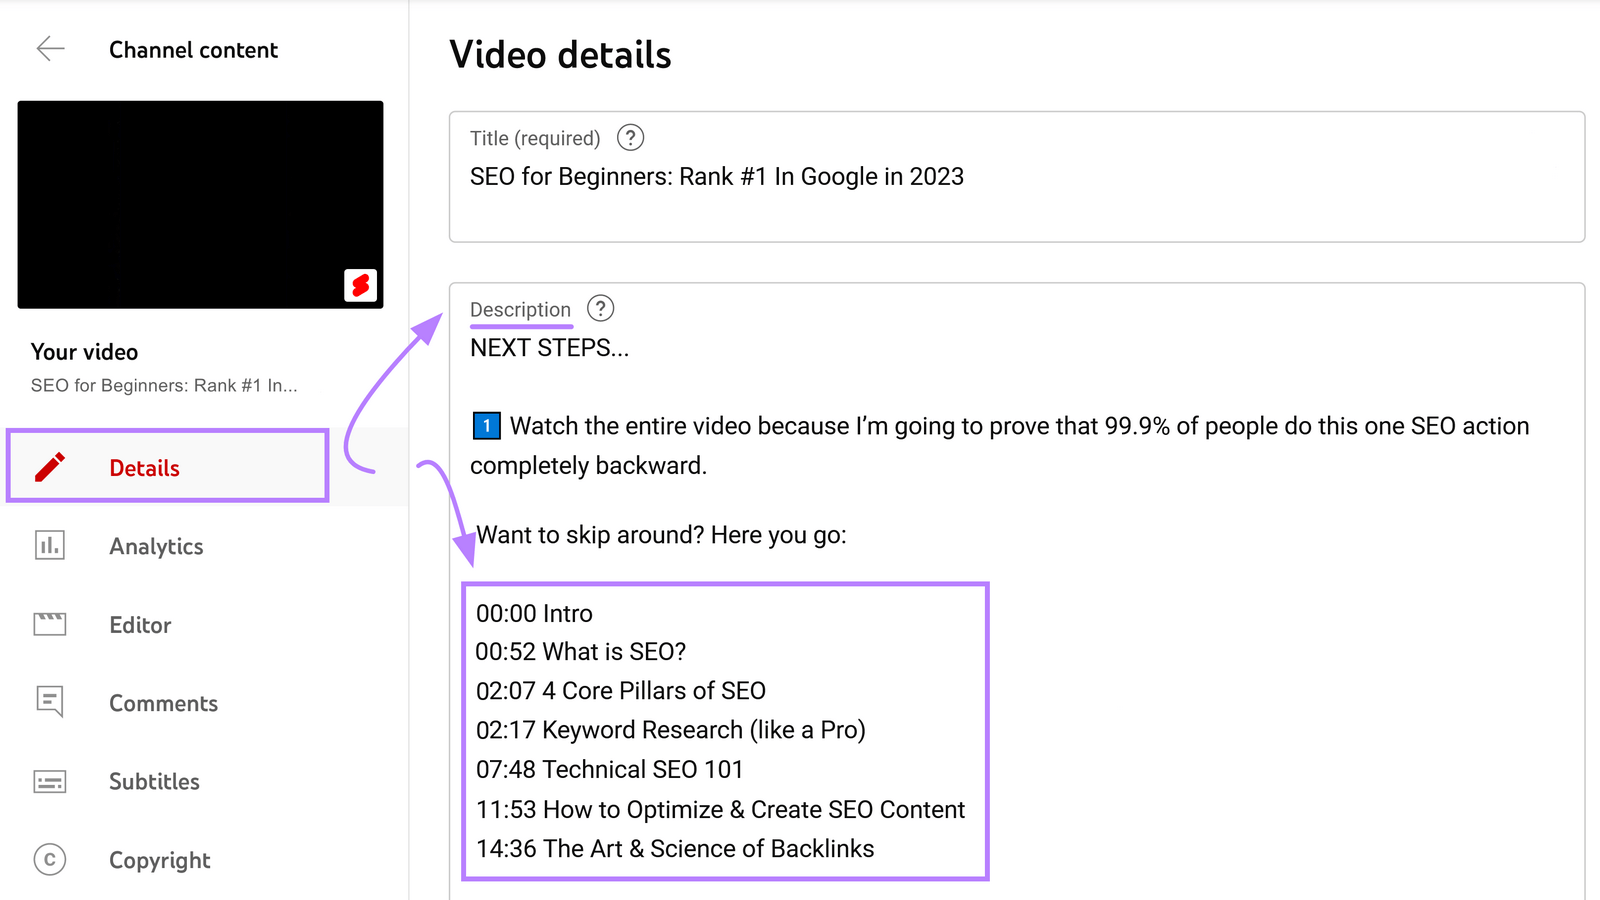 Adding video chapters in the description section of the "Video details" page on Youtube.